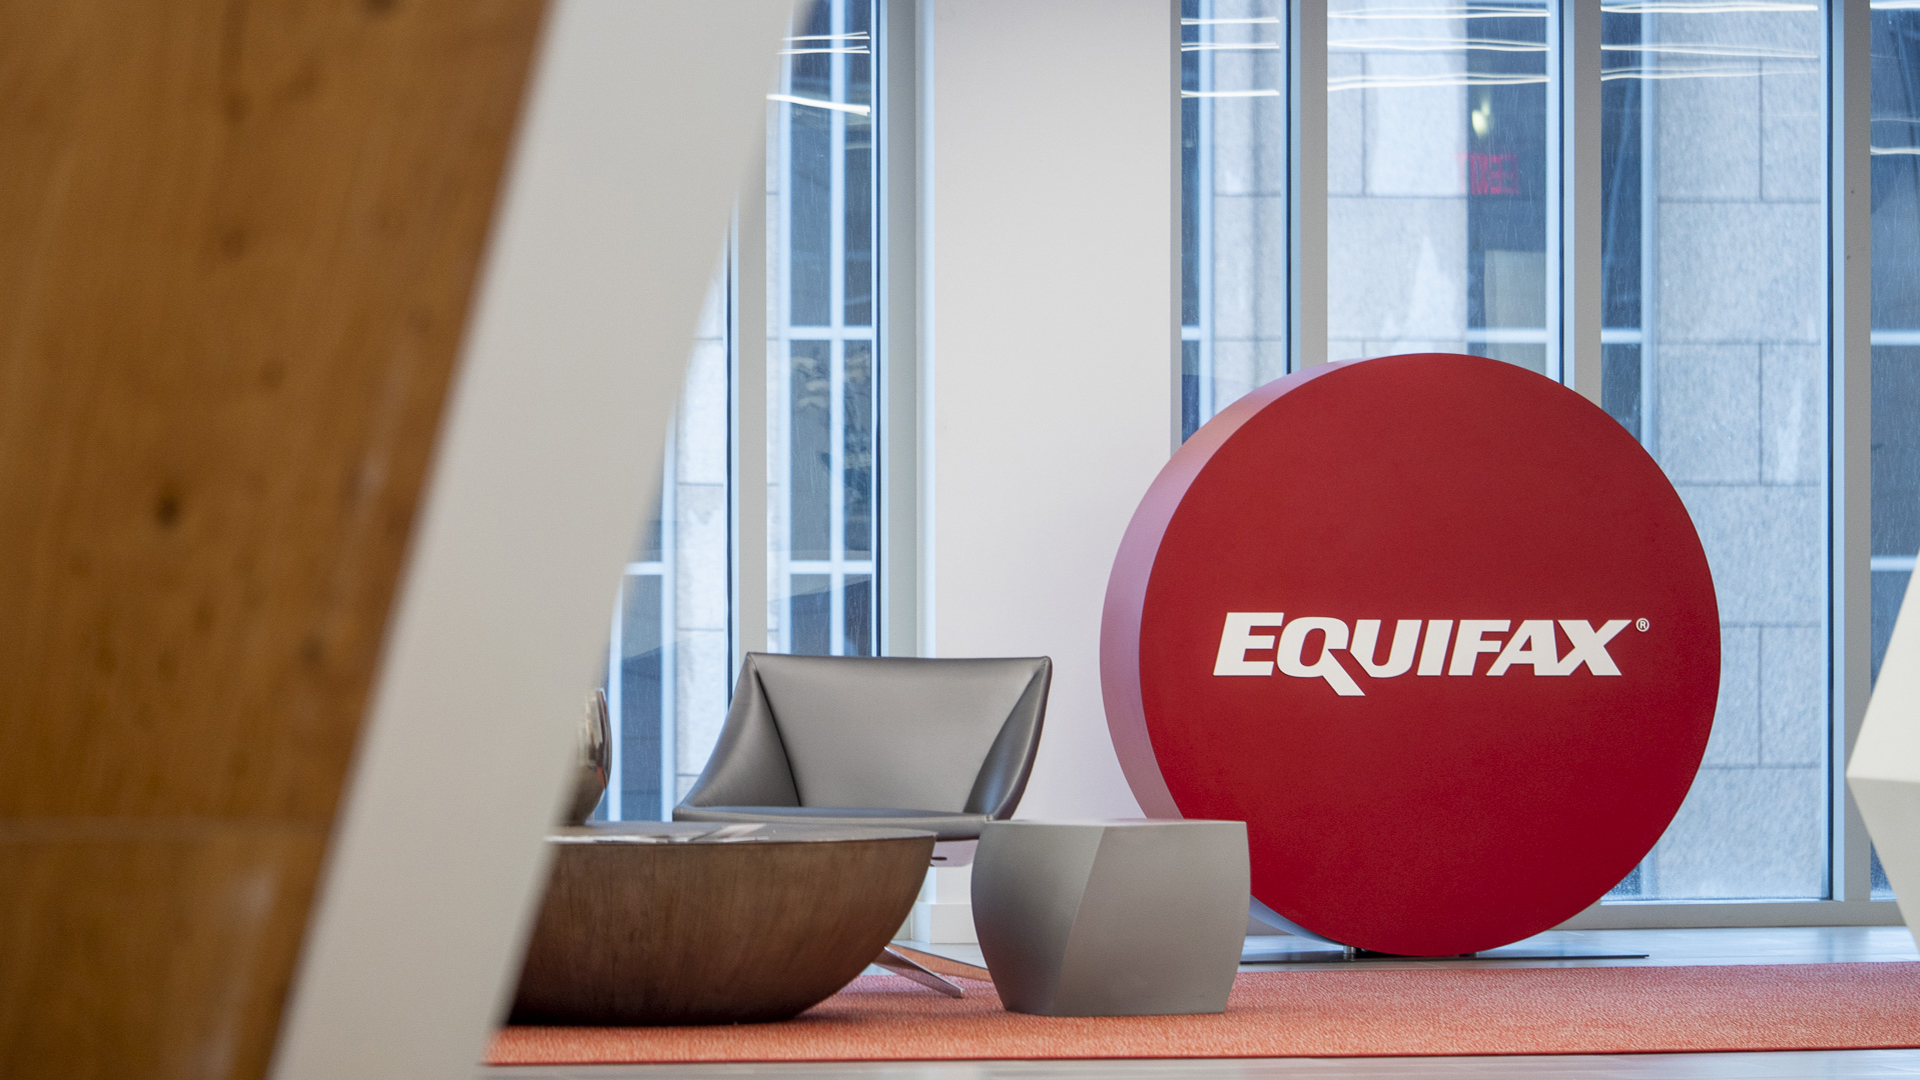 Spotlight Equifax: Building Credit for 123 Years